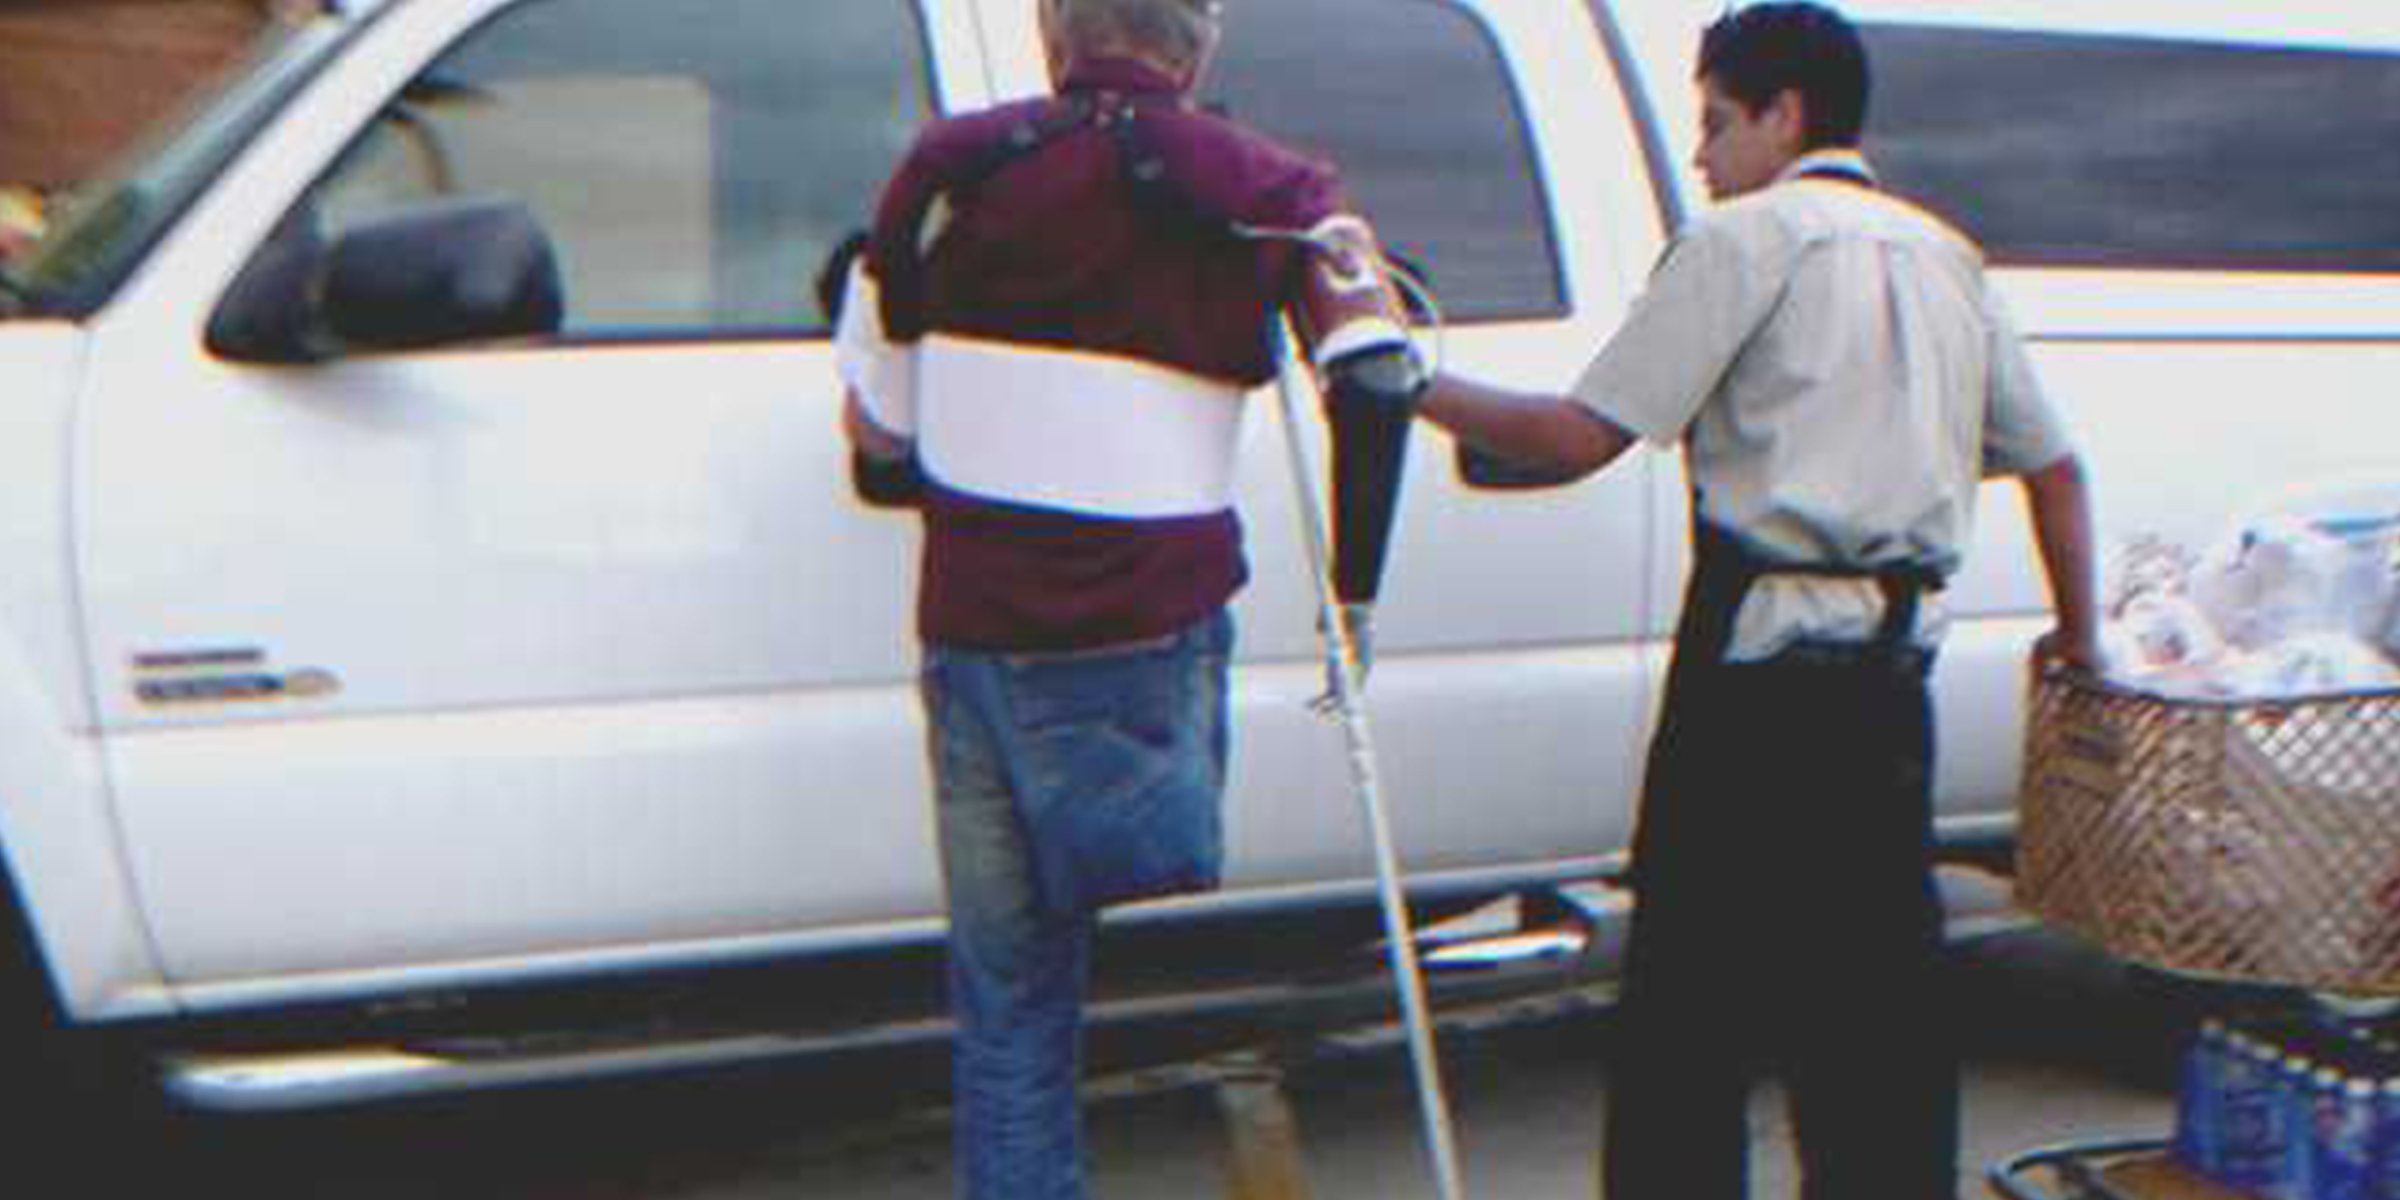 A store clerk helping a disabled man | Source: Flickr/Paul L Dineen (CC BY 2.0)